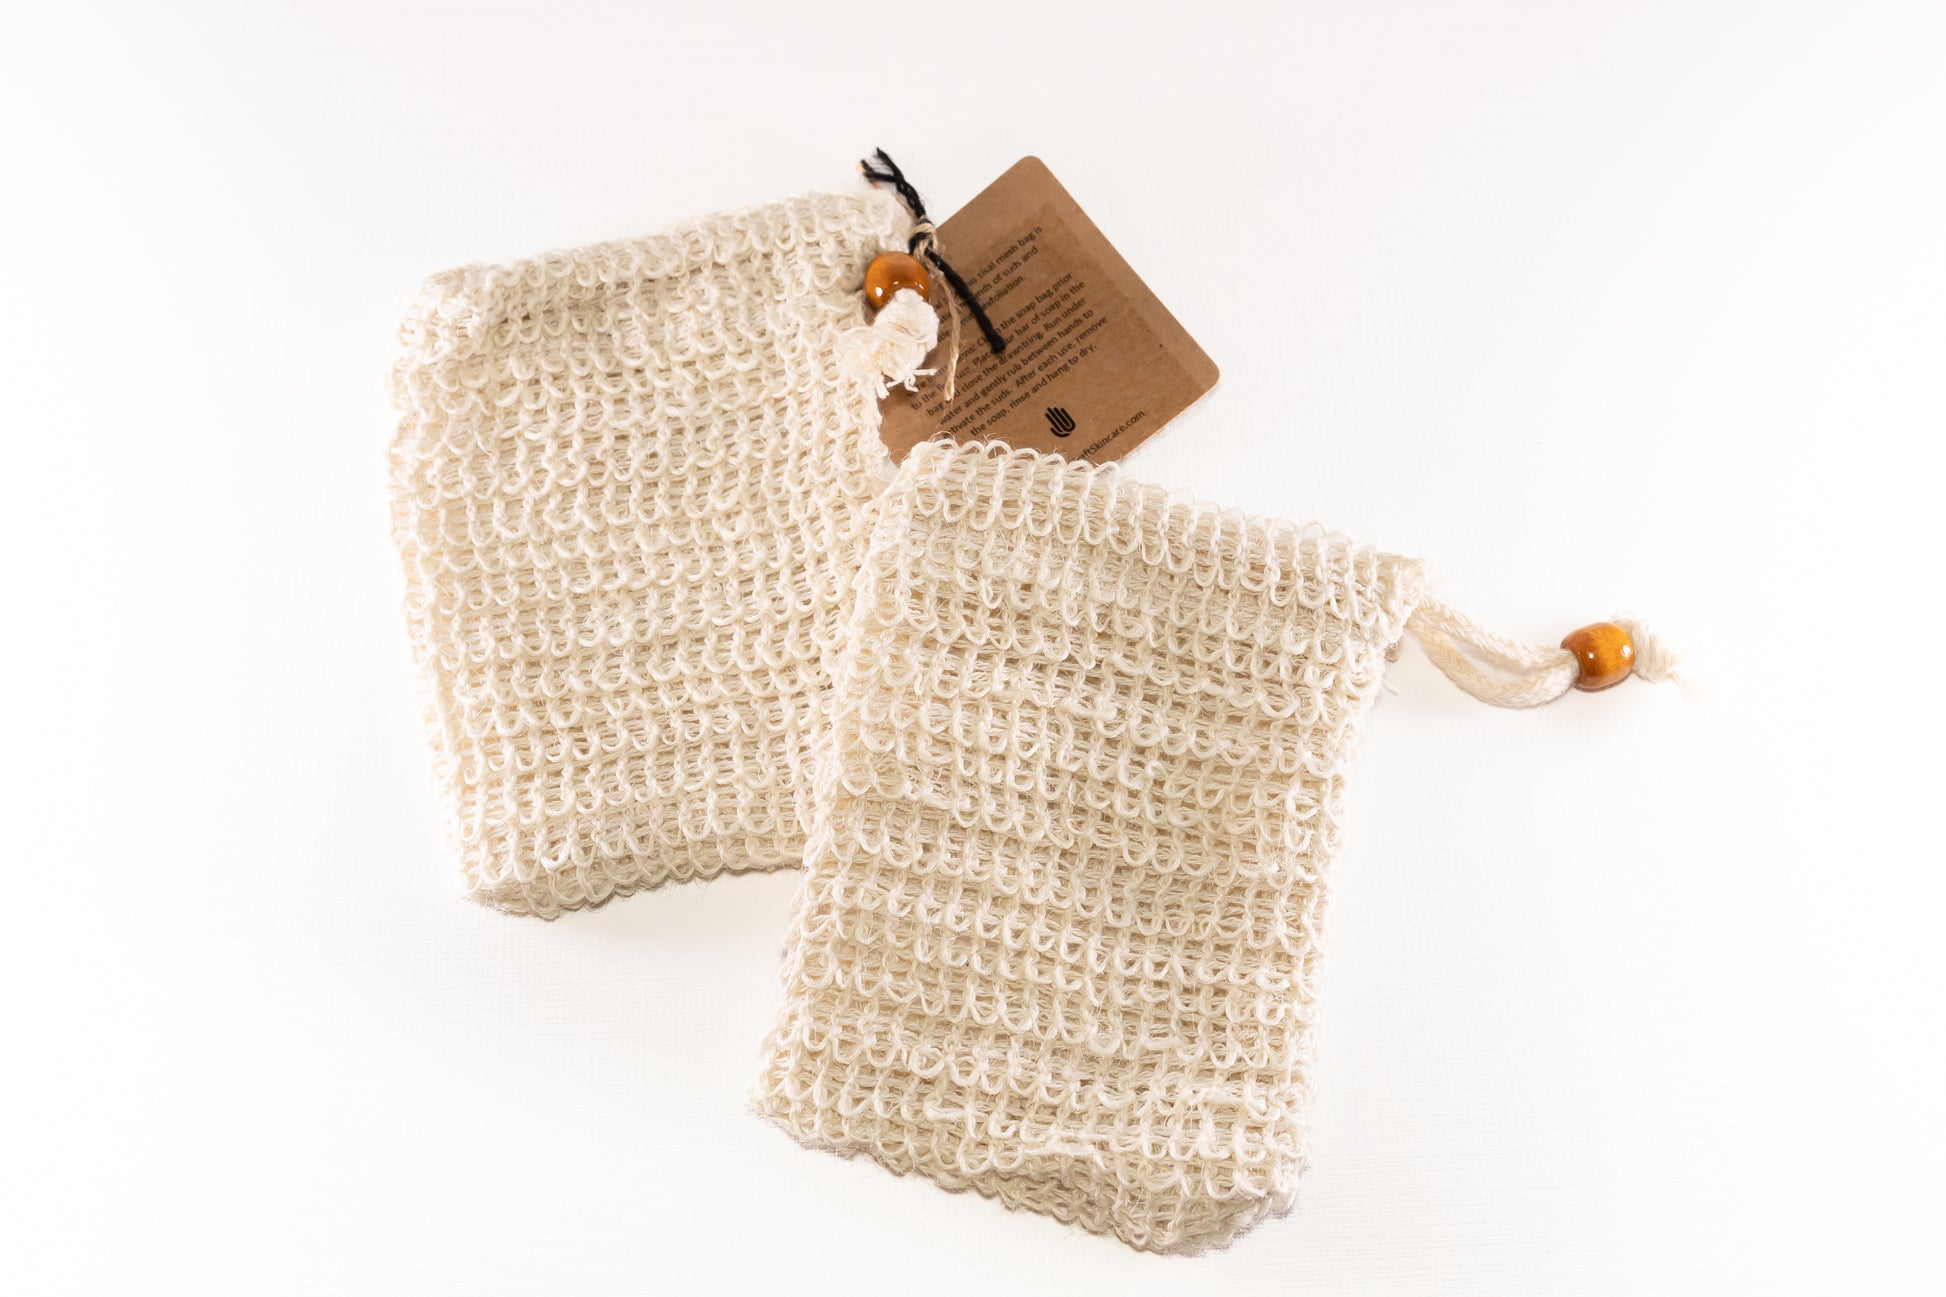 two natural sisal soap saver bags with wooden beads on the drawstring sitting on a white background